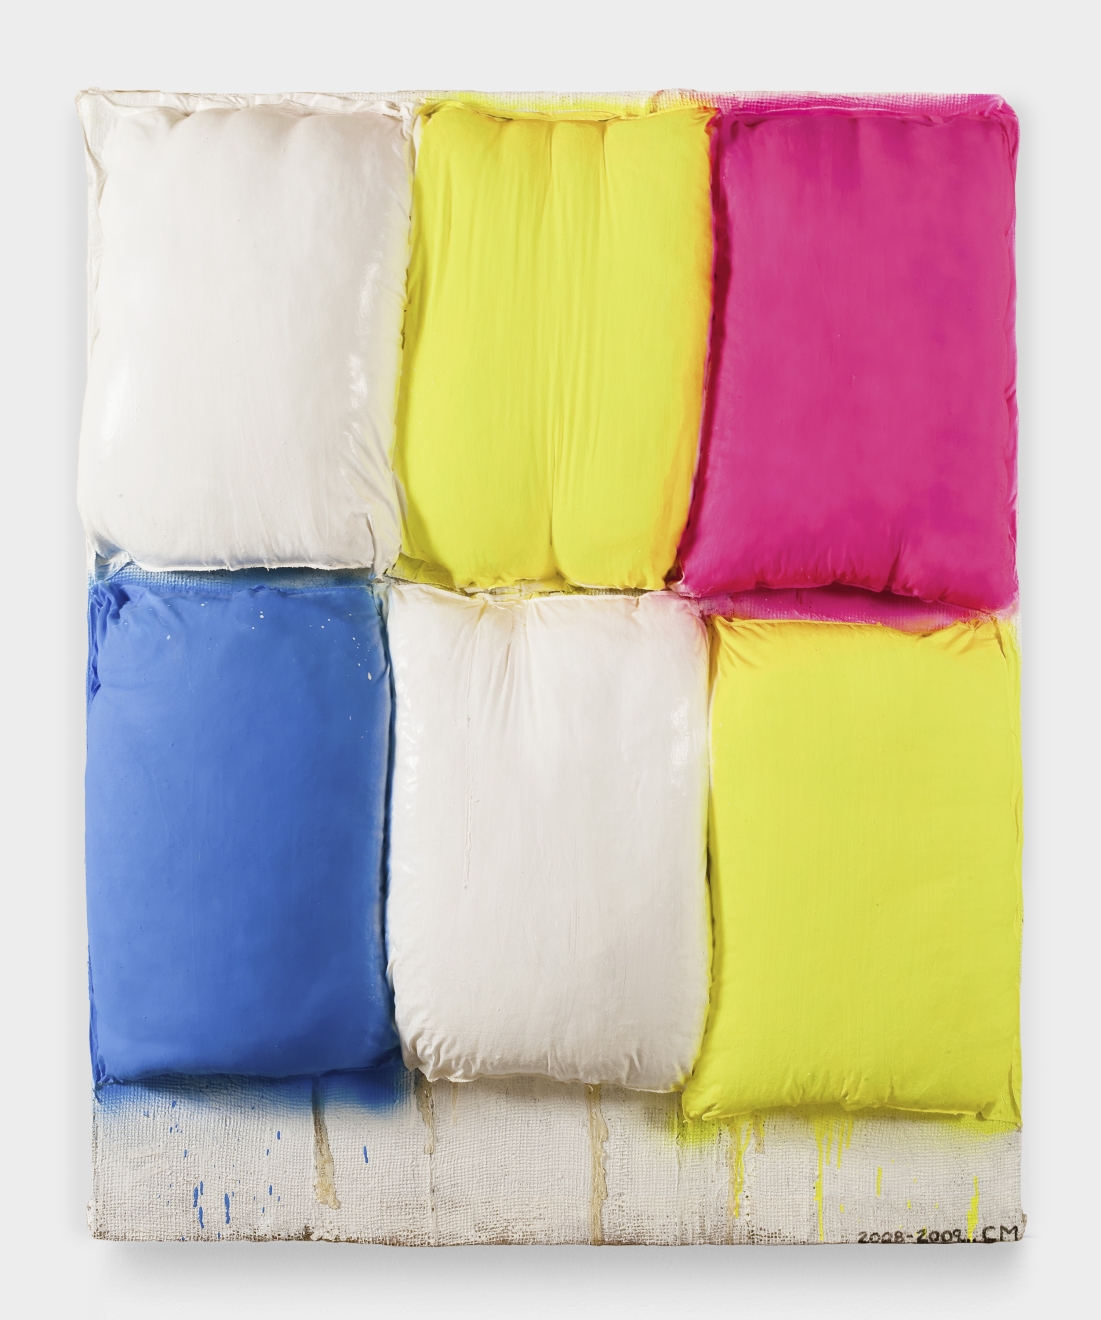 Chris Martin Sweet Dreams (2nd Pillow Painting), 2008-2009